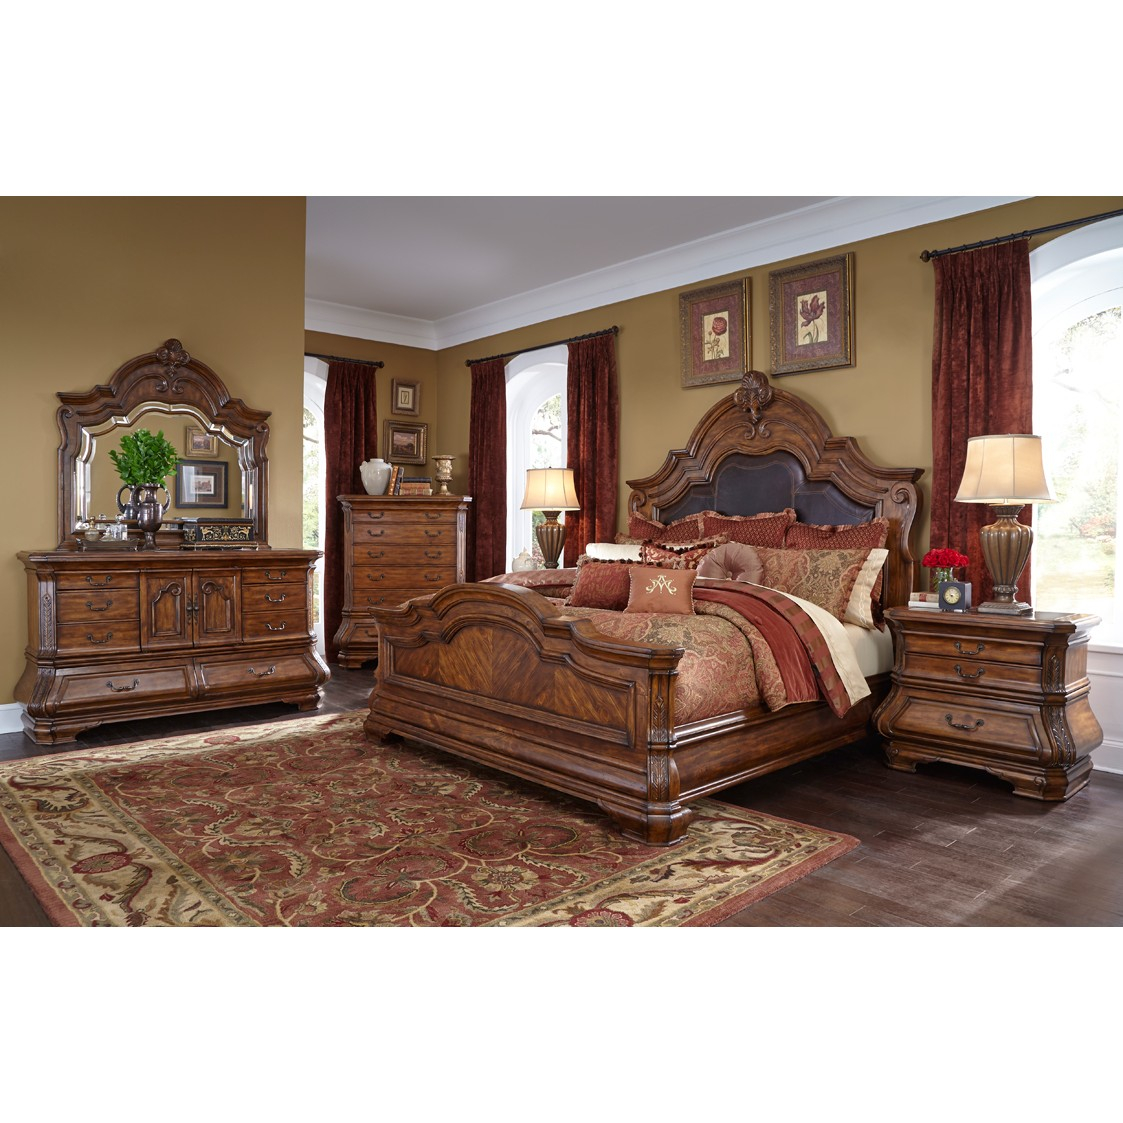 Michael Amini Tuscano Melange 4pc Queen Size Mansion Bedroom Set Aico throughout size 1123 X 1123